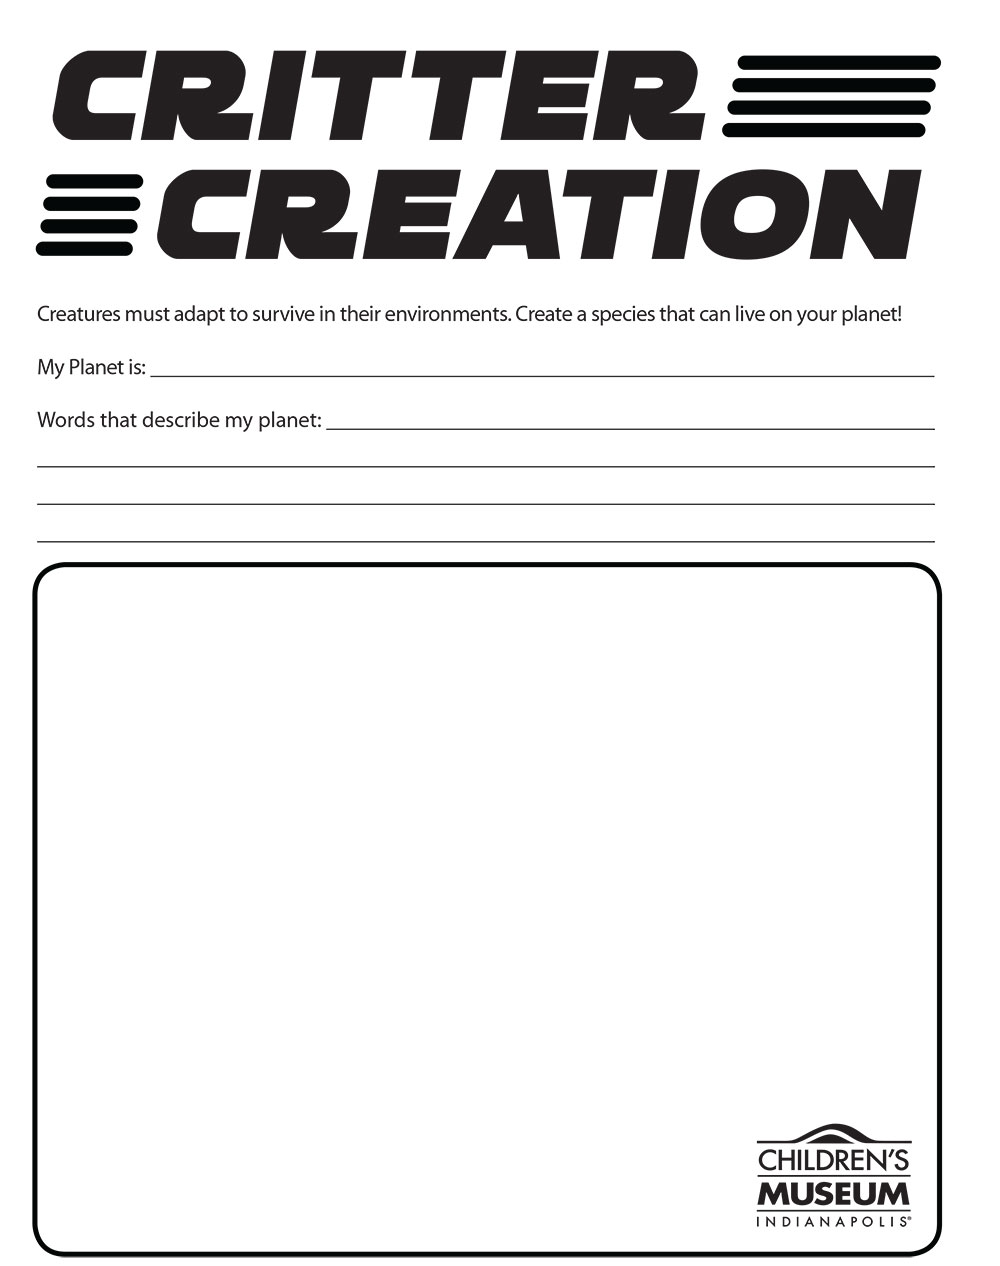 Critter Creation Activity Sheet for Star Wars Day for Museum at Home with The Children's Museum of Indianapolis